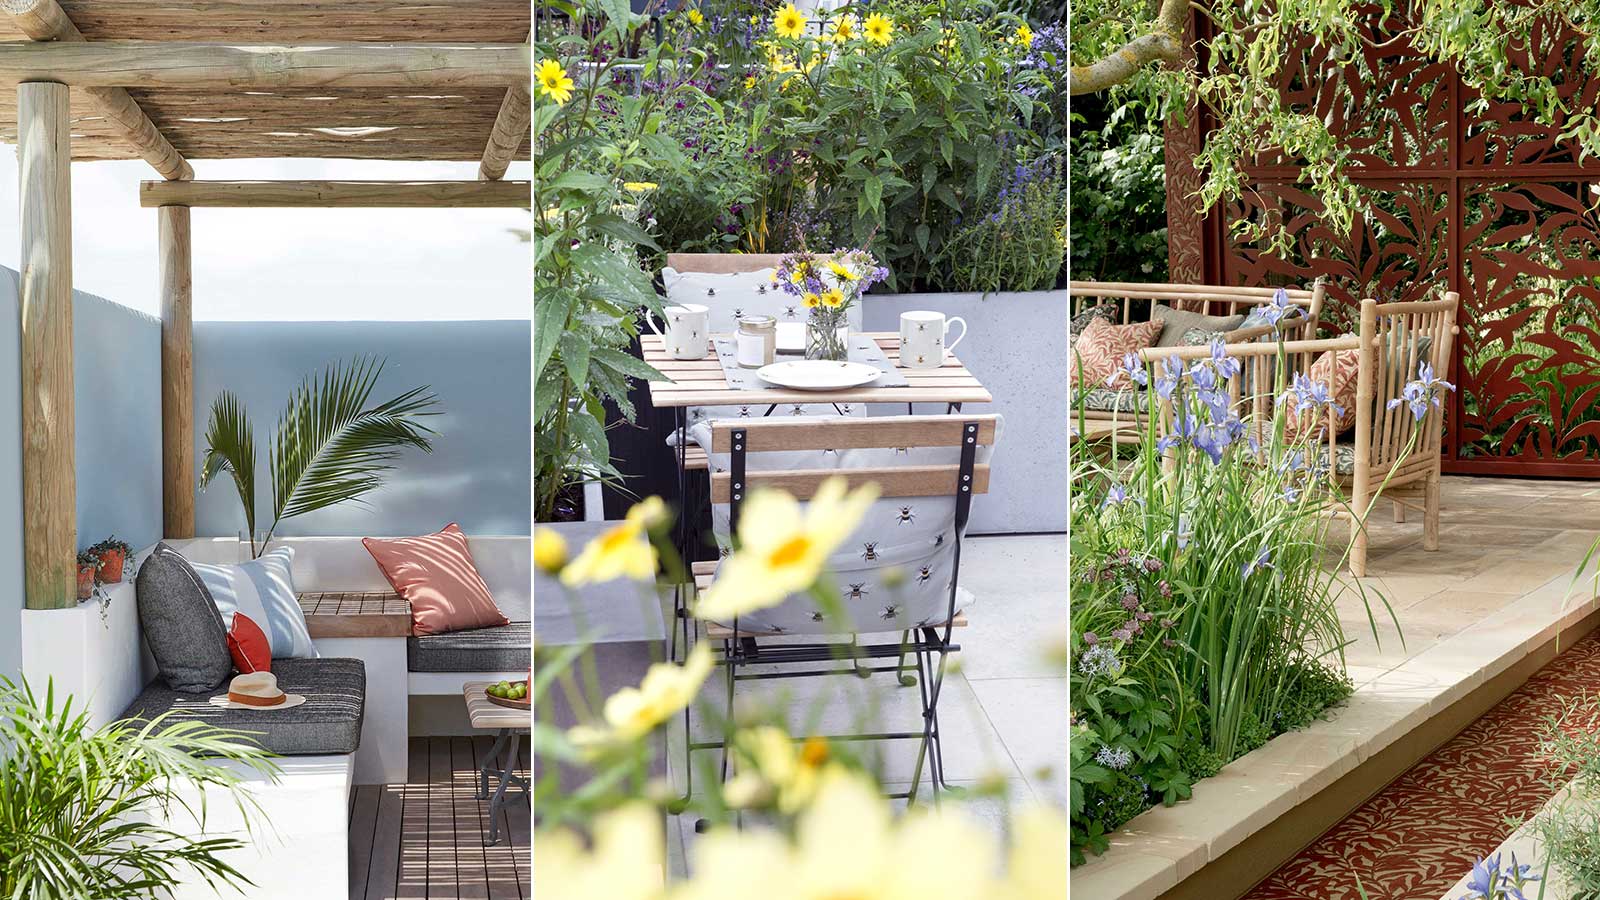 6 Small Patio/Balcony Decorating Ideas To Get Your Outdoor Space